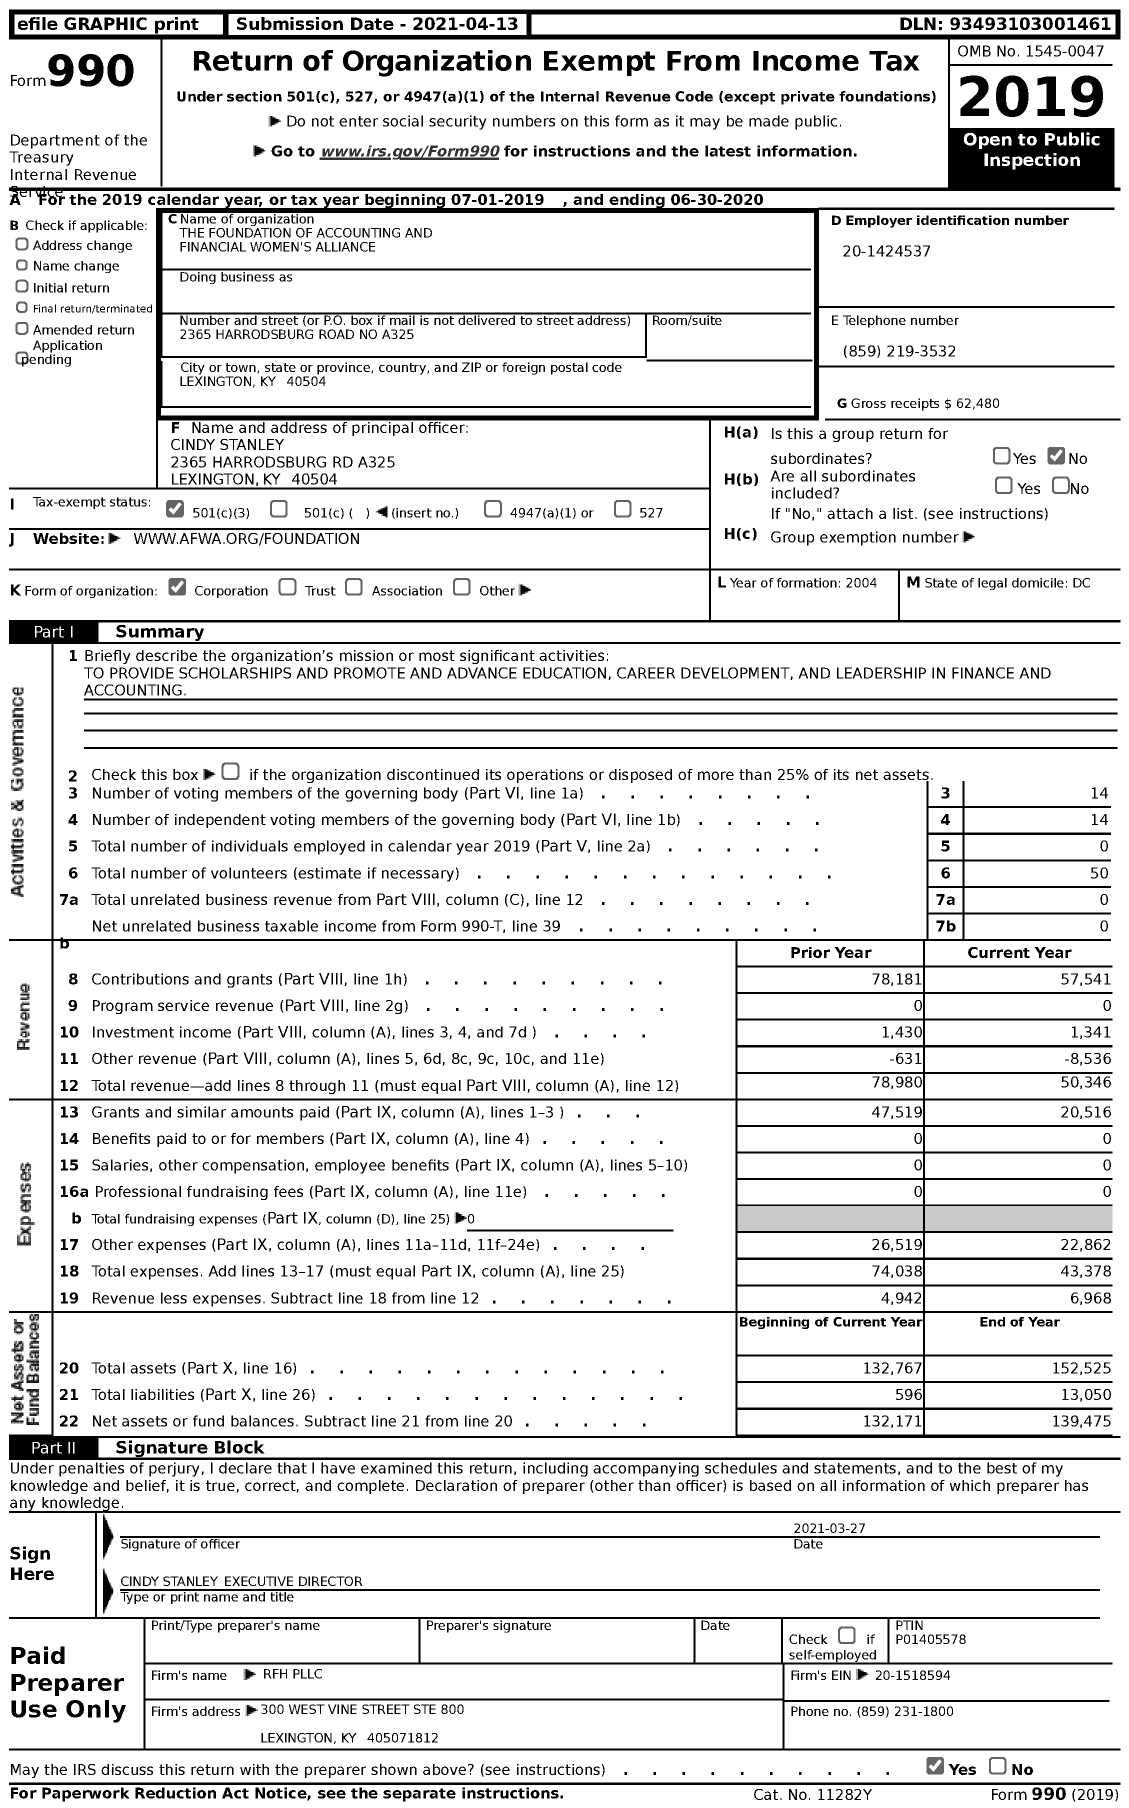 Image of first page of 2019 Form 990 for The Foundation of Accounting and Financial Women's Alliance